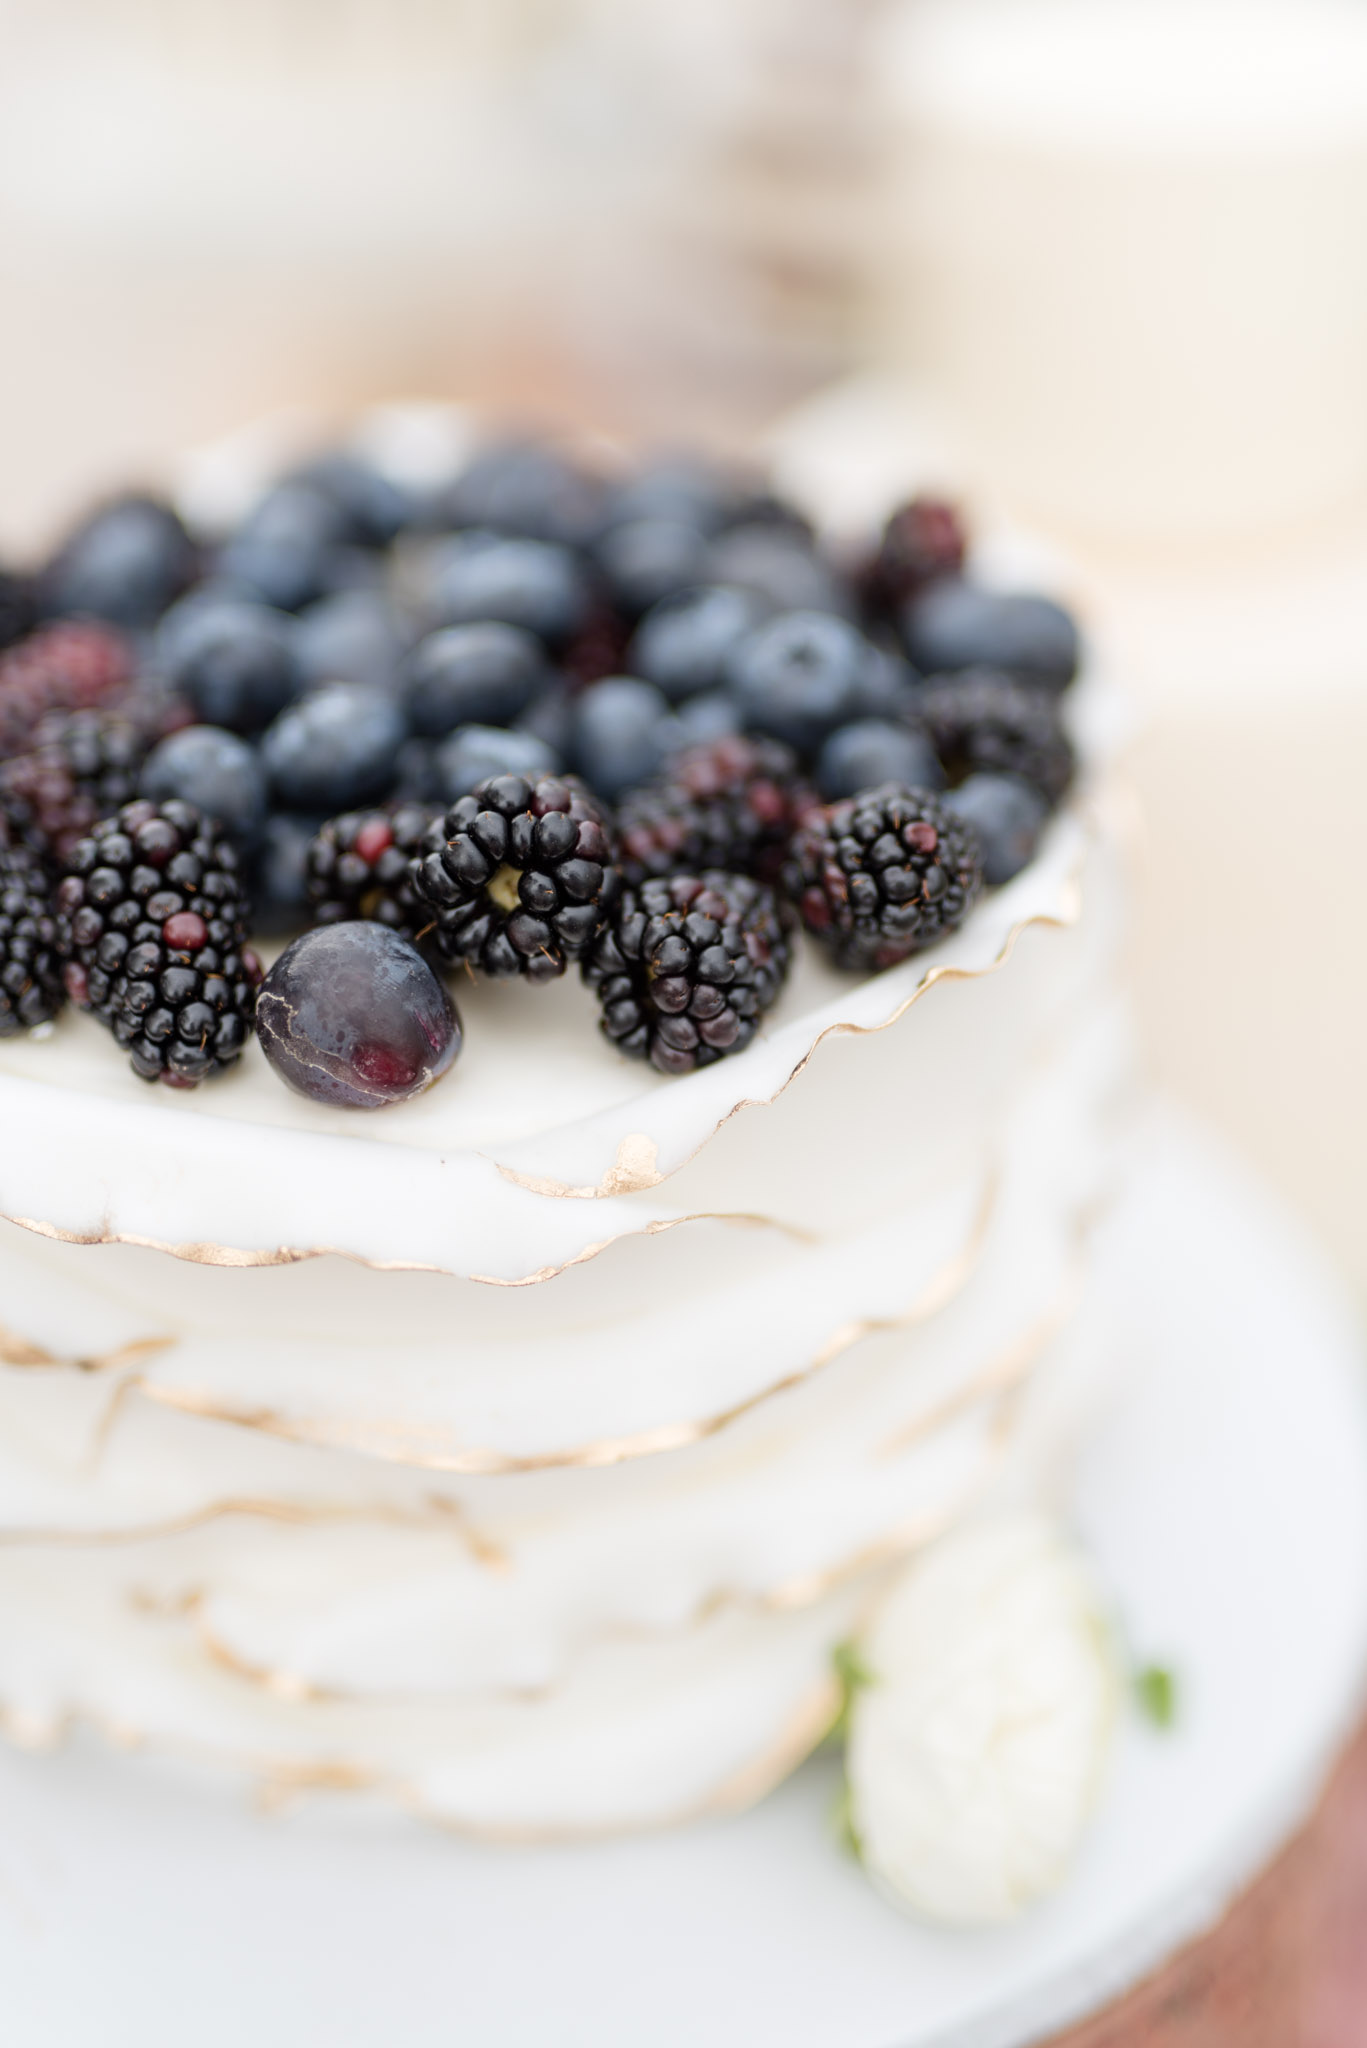 Wedding cake with berries on top.